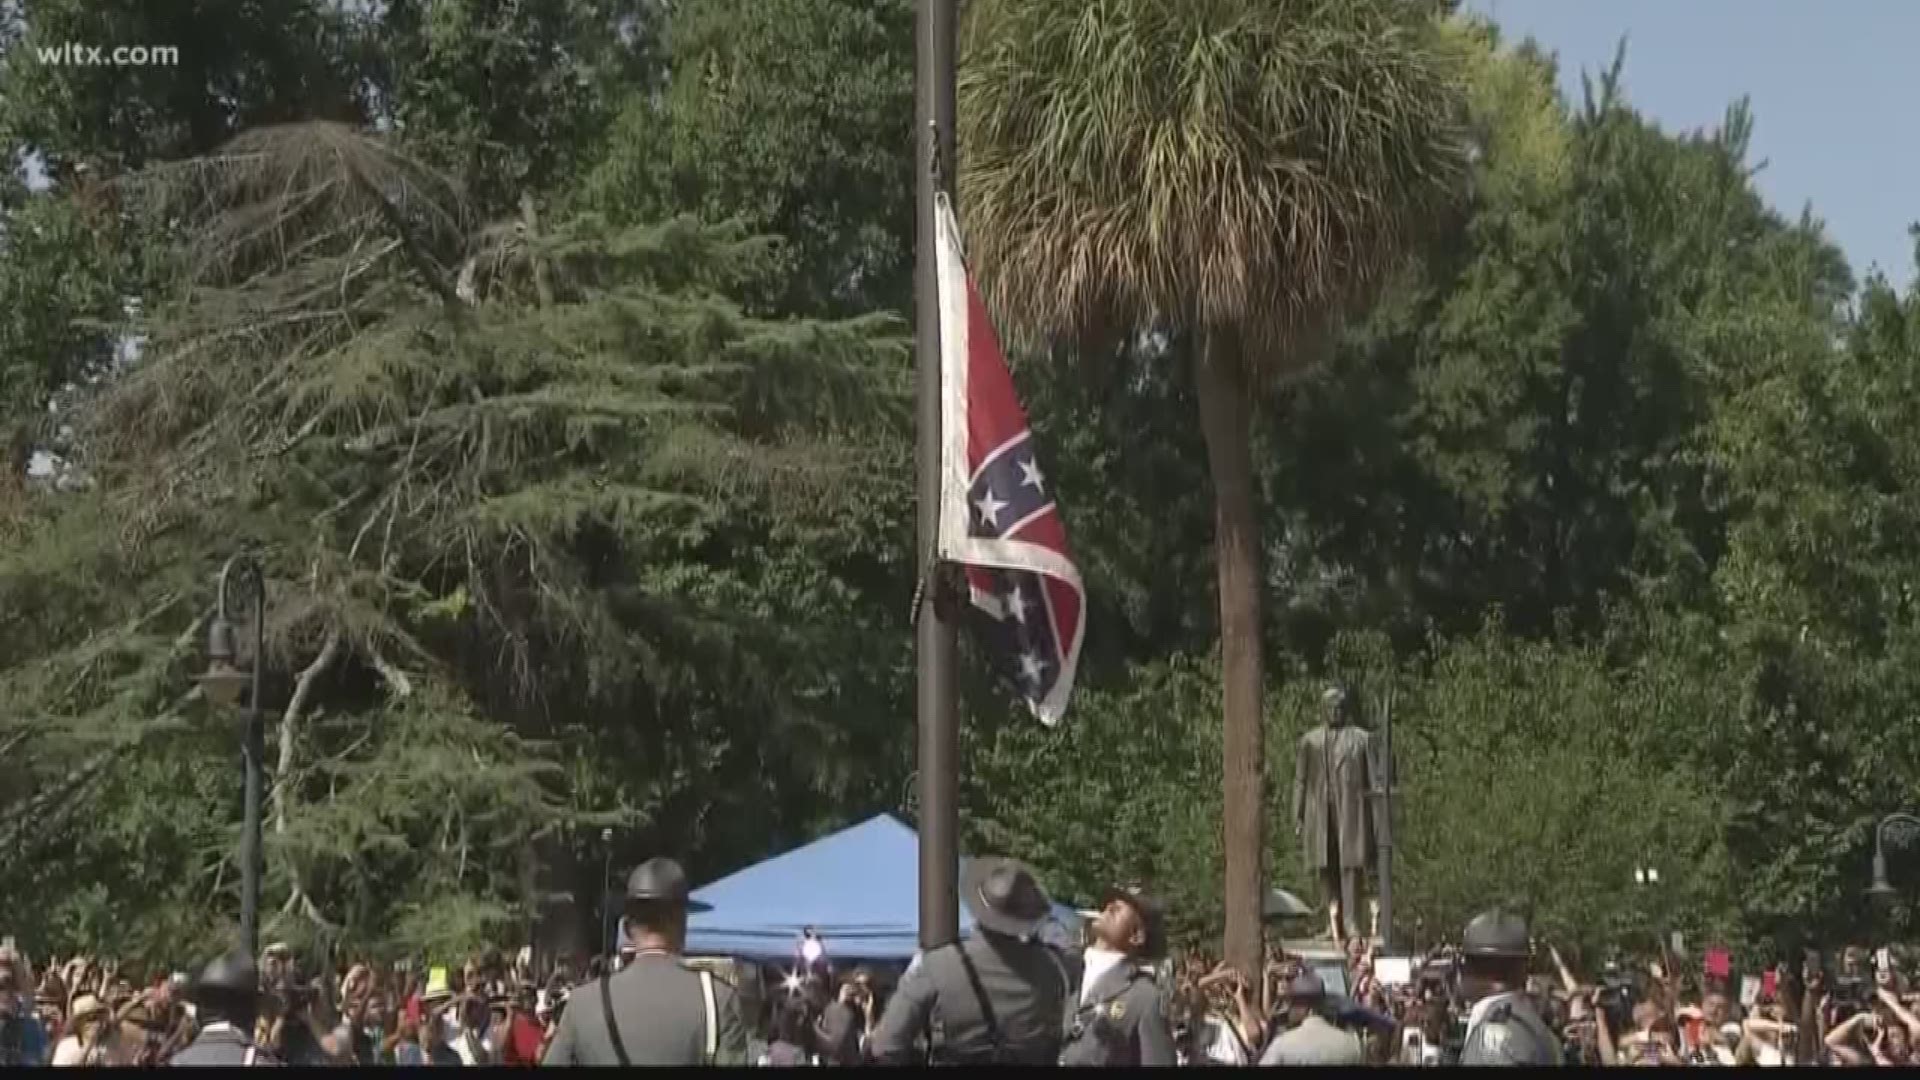 The flag was taken away from the South Carolina capitol building in Columbia back in 2015, in the wake of the massacre at a church in Charleston. It's now housed in a museum.